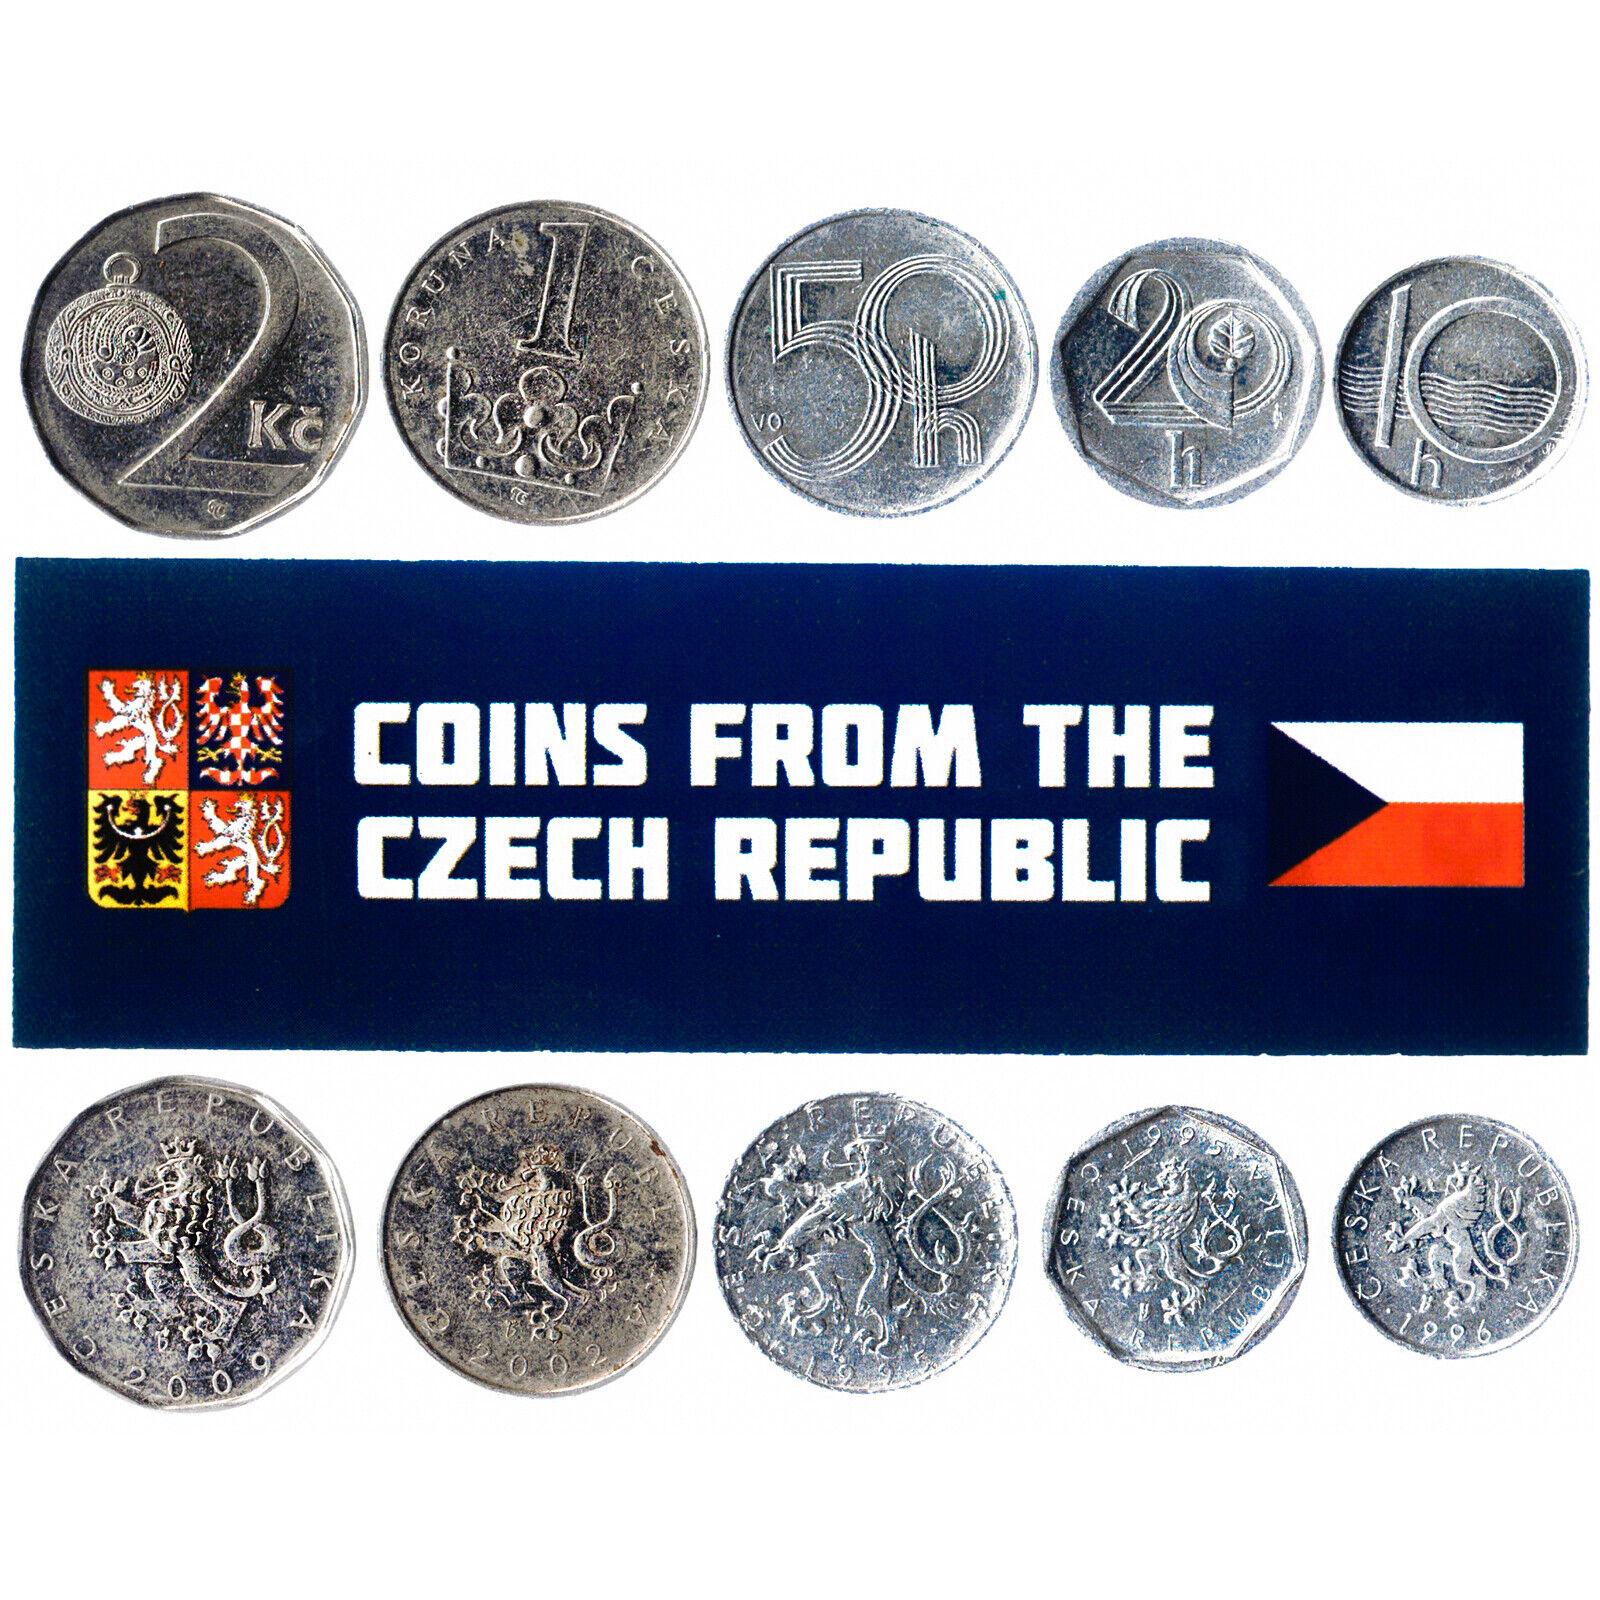 5 CZECH COINS DIFFERENT EUROPEAN COINS FOREIGN CURRENCY, VALUABLE MONEY Без бренда